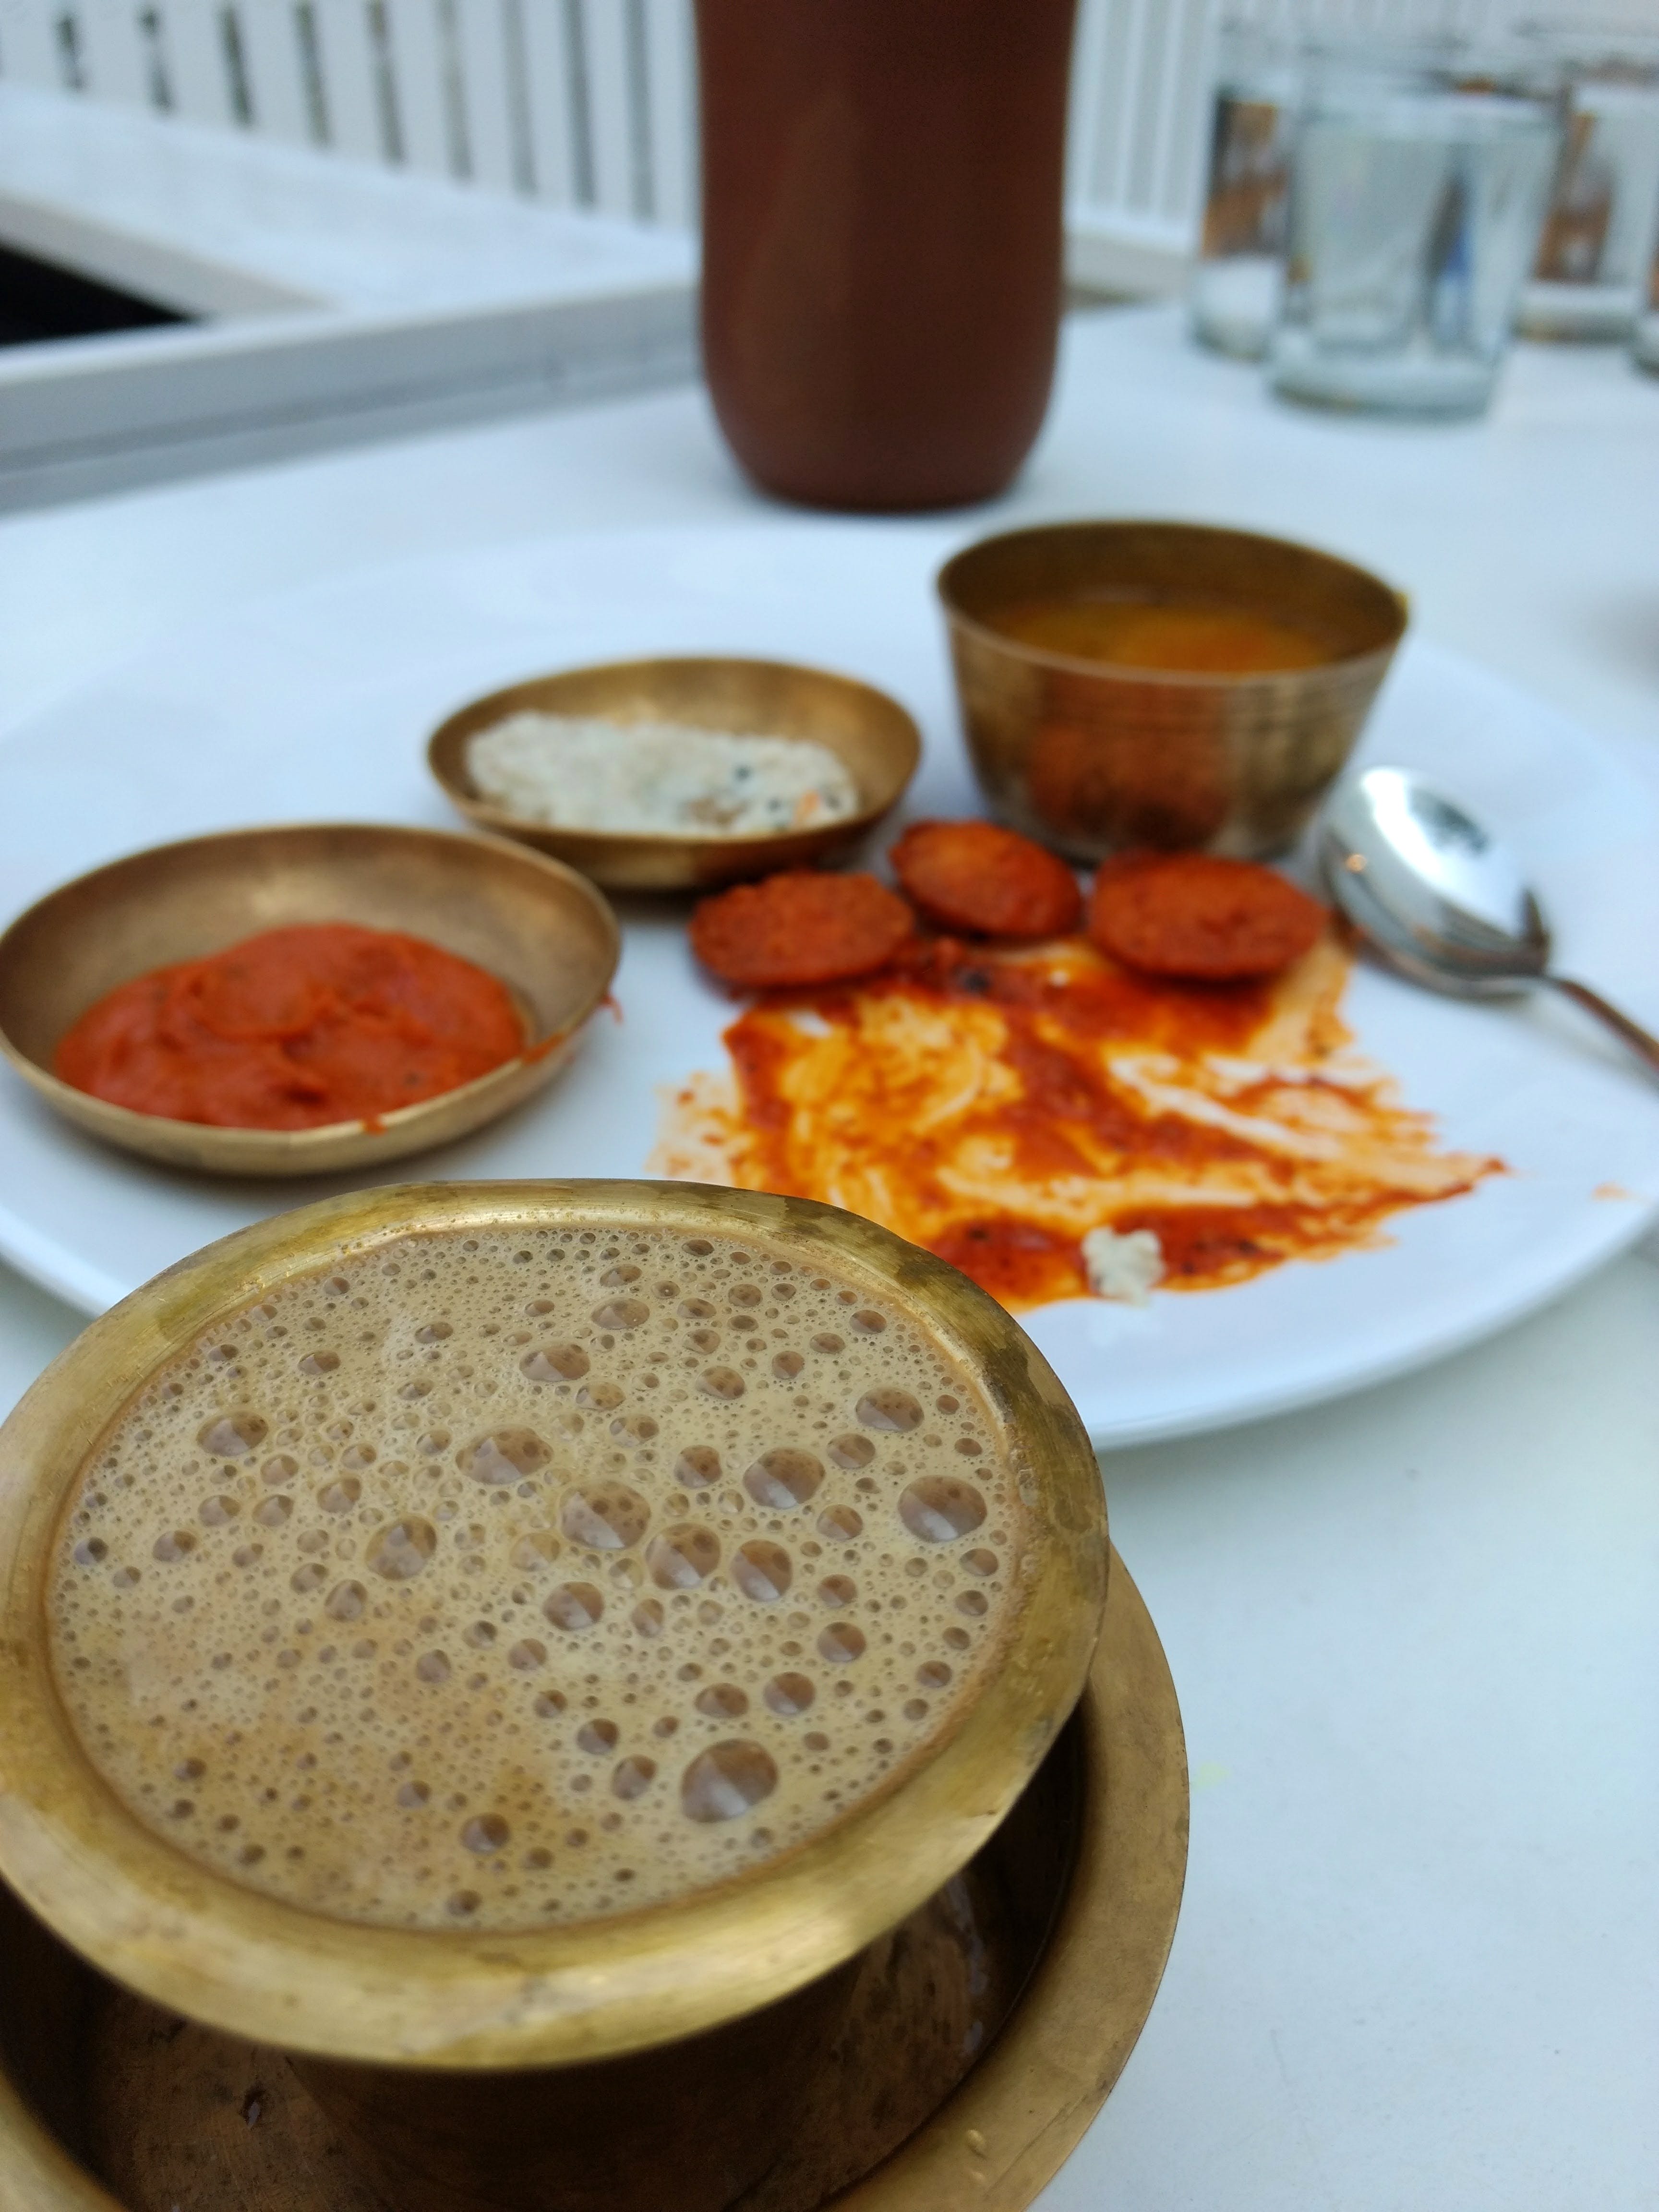 Dish,Food,Cuisine,Ingredient,Meal,Breakfast,Indian cuisine,Chapati,Produce,Indian filter coffee